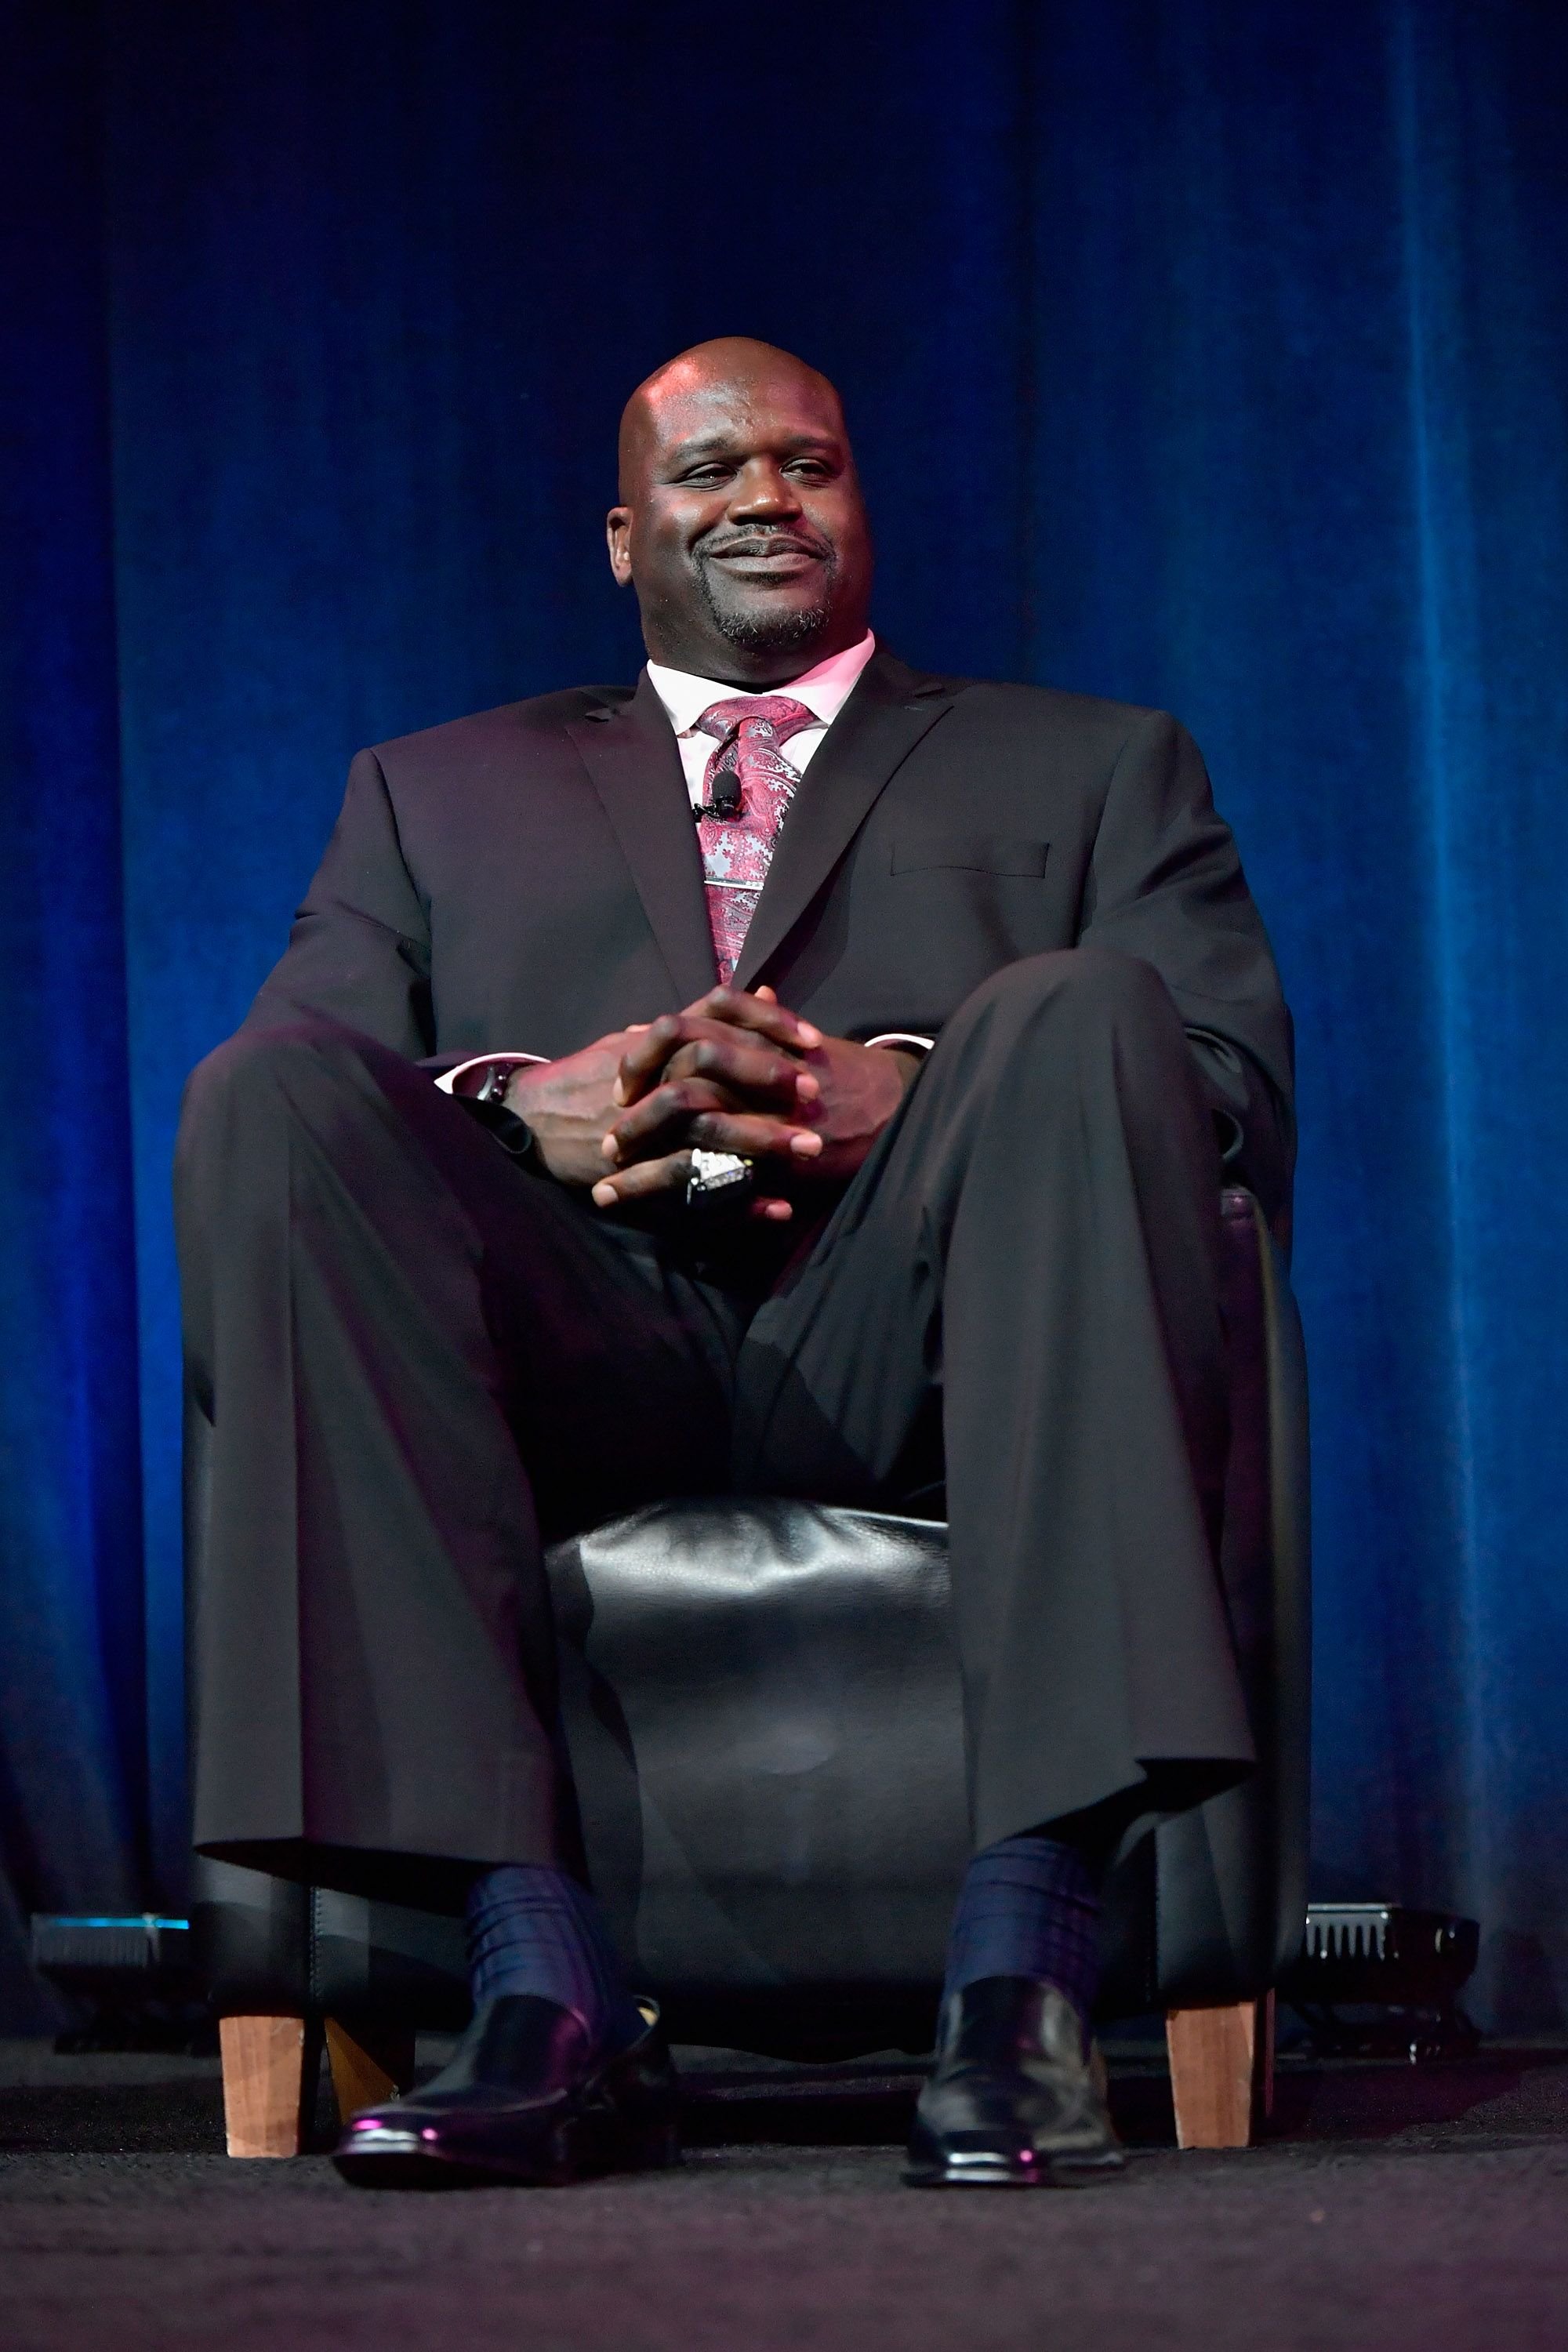 Shaquille O'Neal receives the Basketball Legacy Award at the 15th Annual Sports Museum Tradition Awards Ceremony at TD Garden on November 29, 2016 in Boston, Massachusetts. | Source: Getty Images